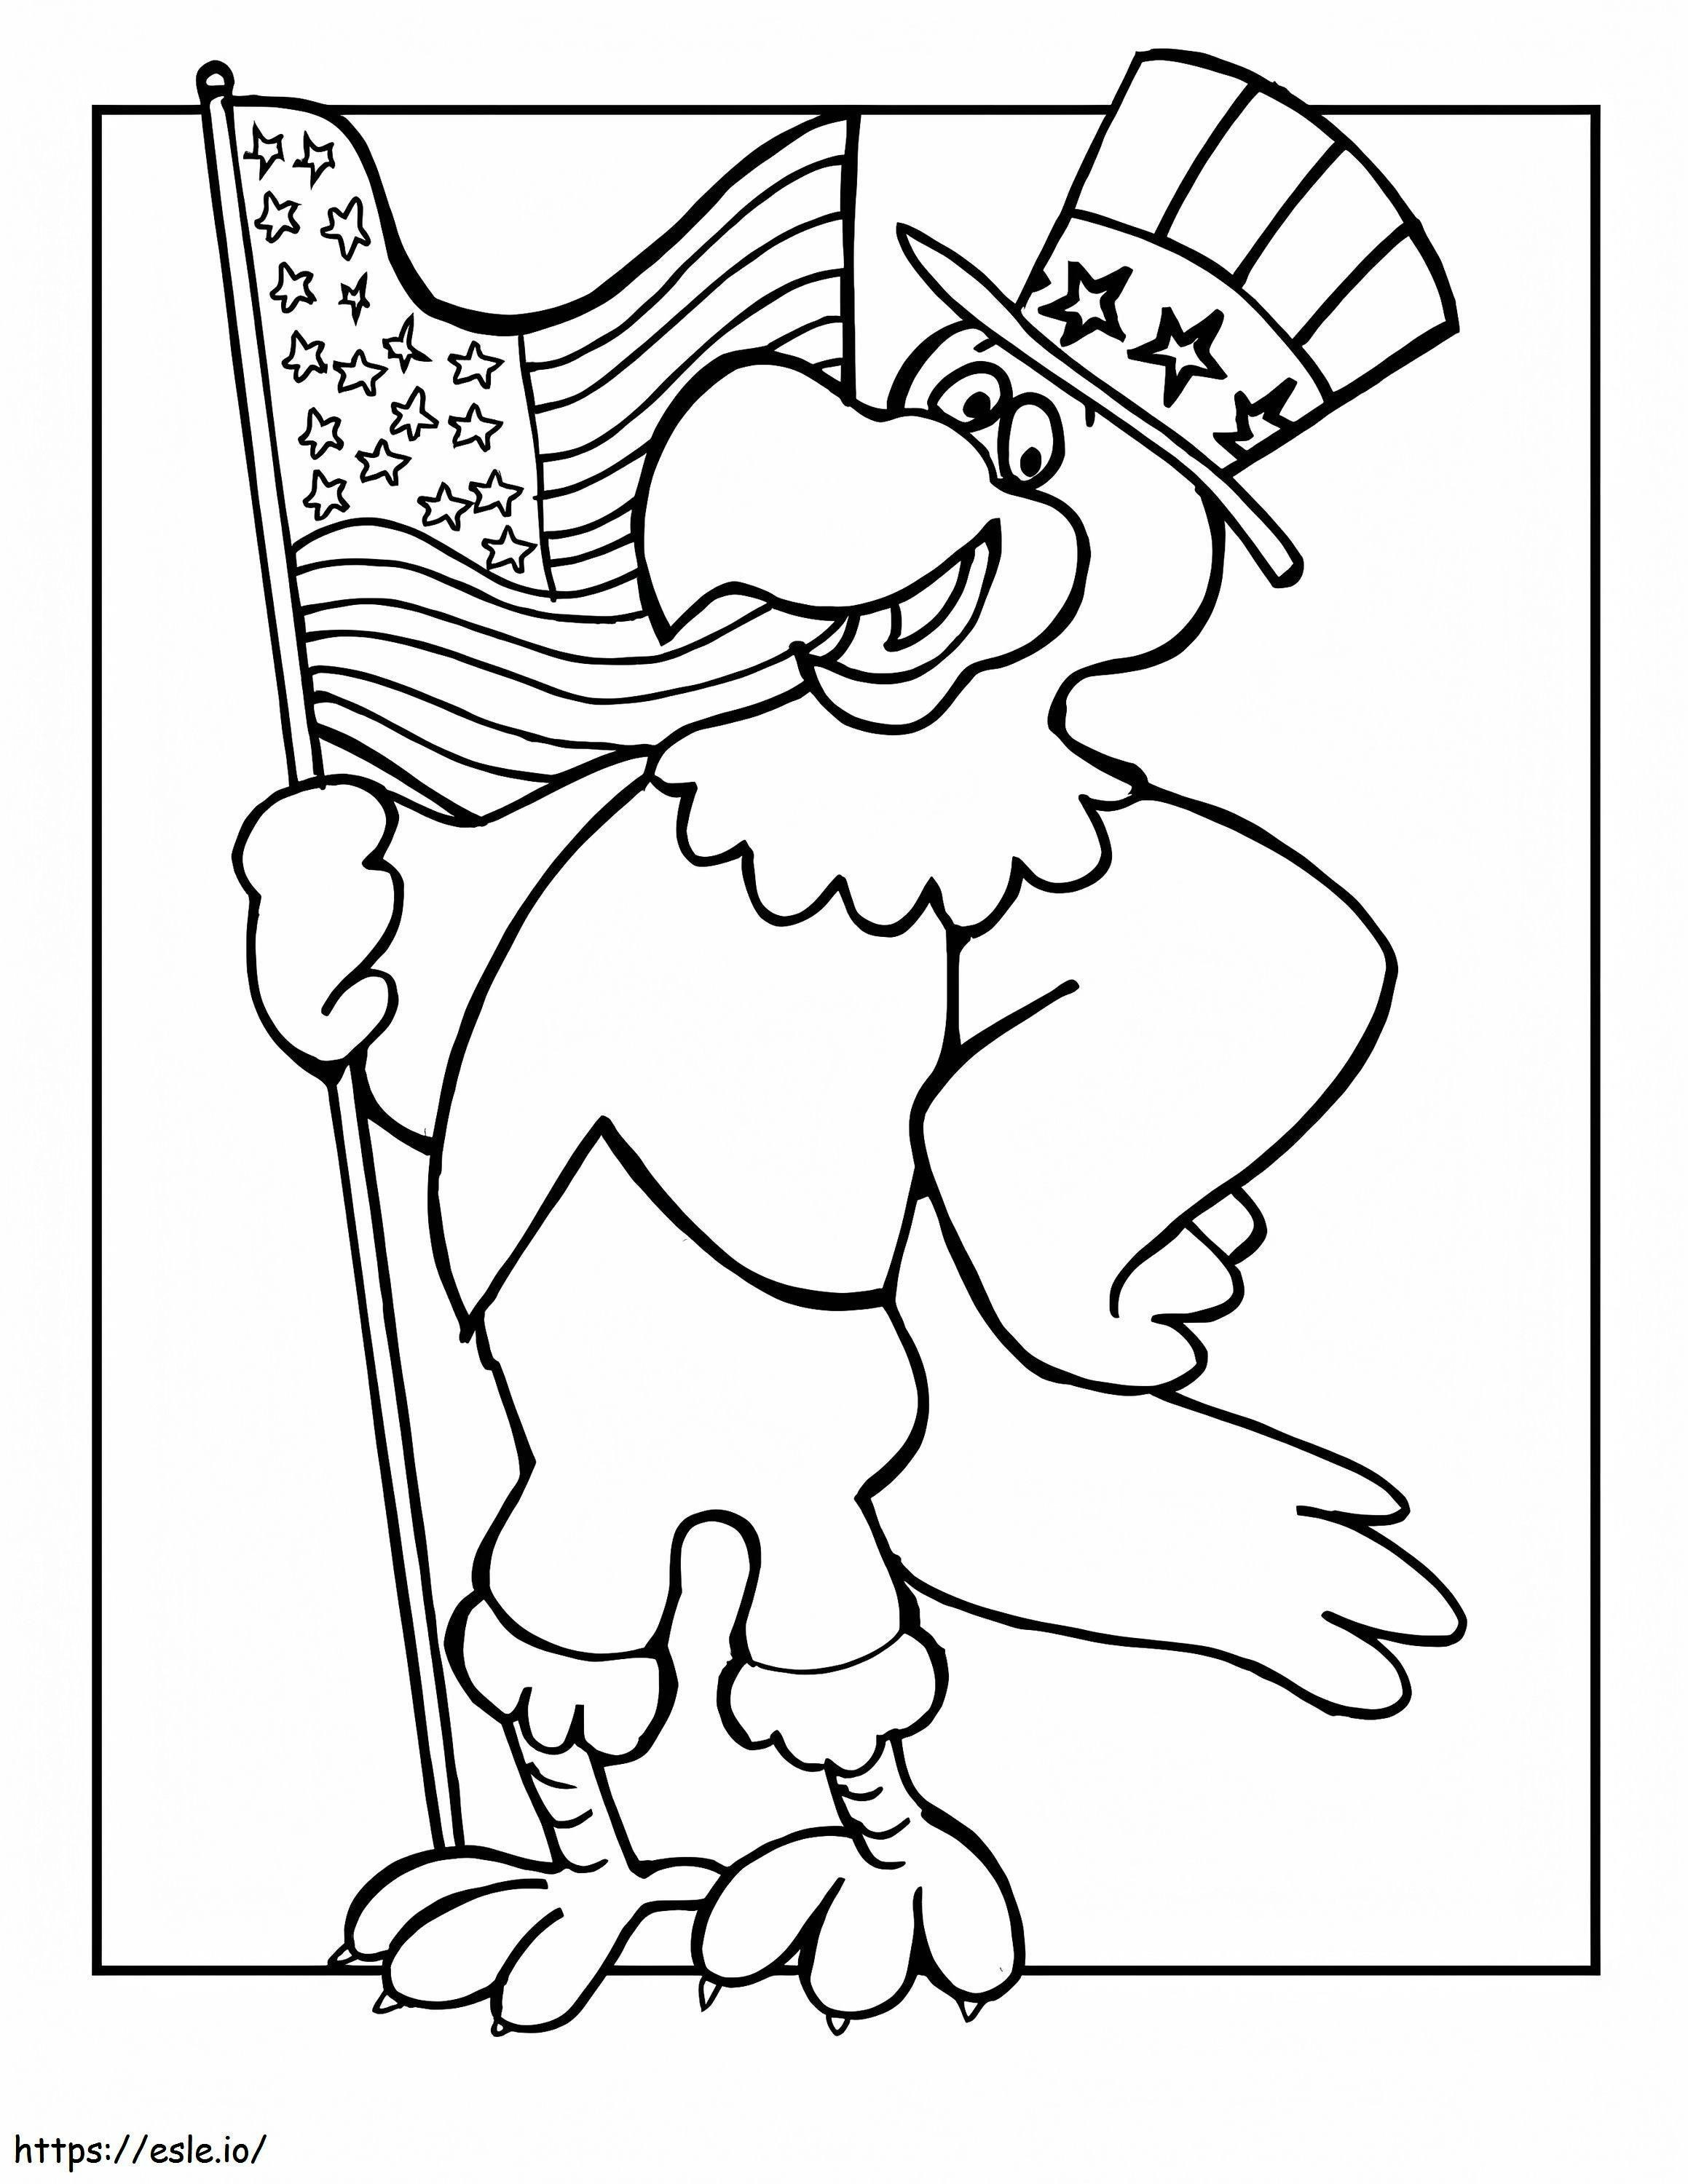 Flag Day 2 coloring page